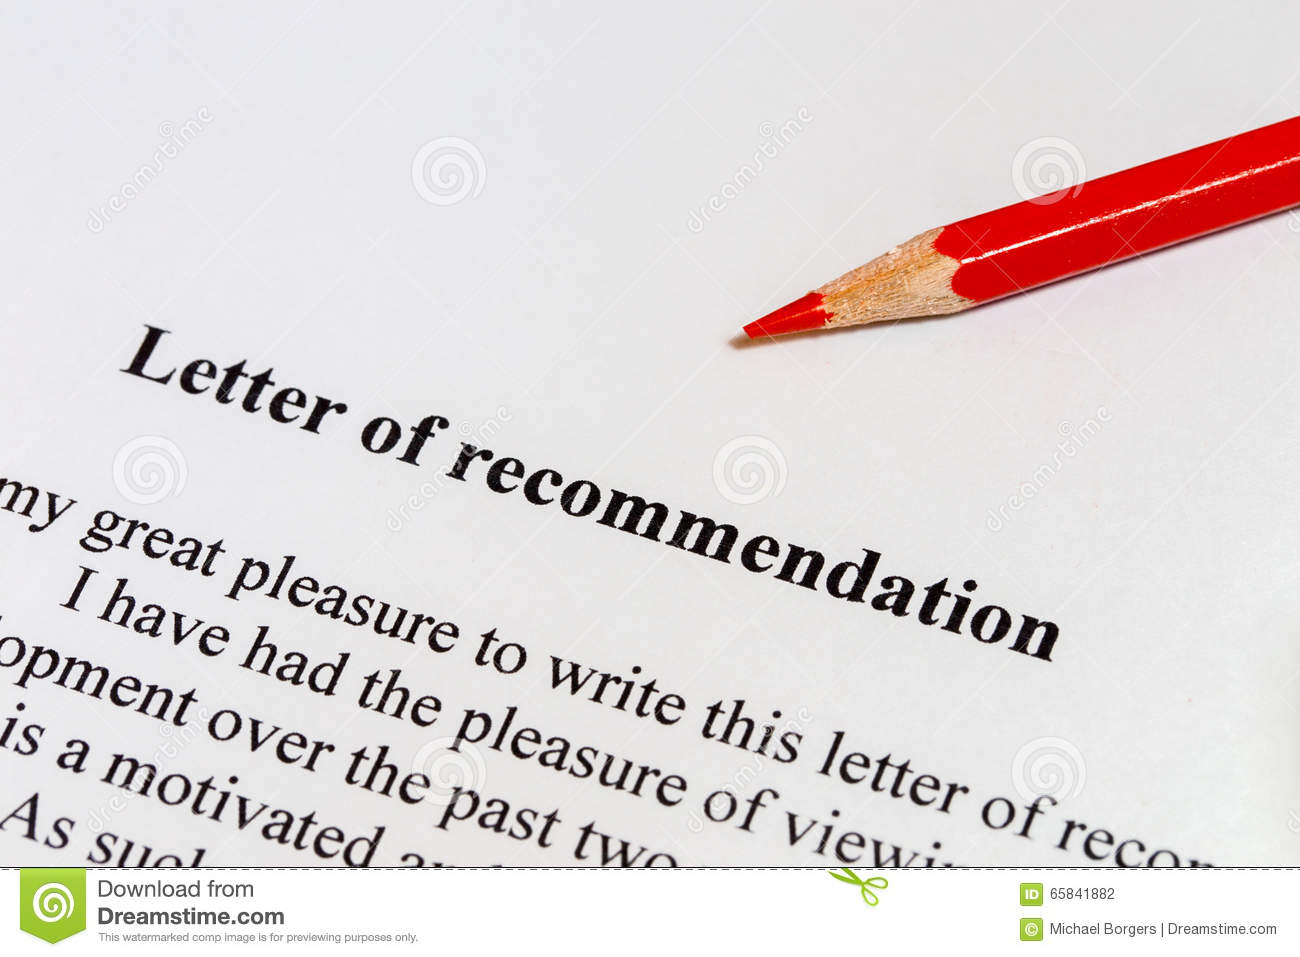 letters clipart reference letter